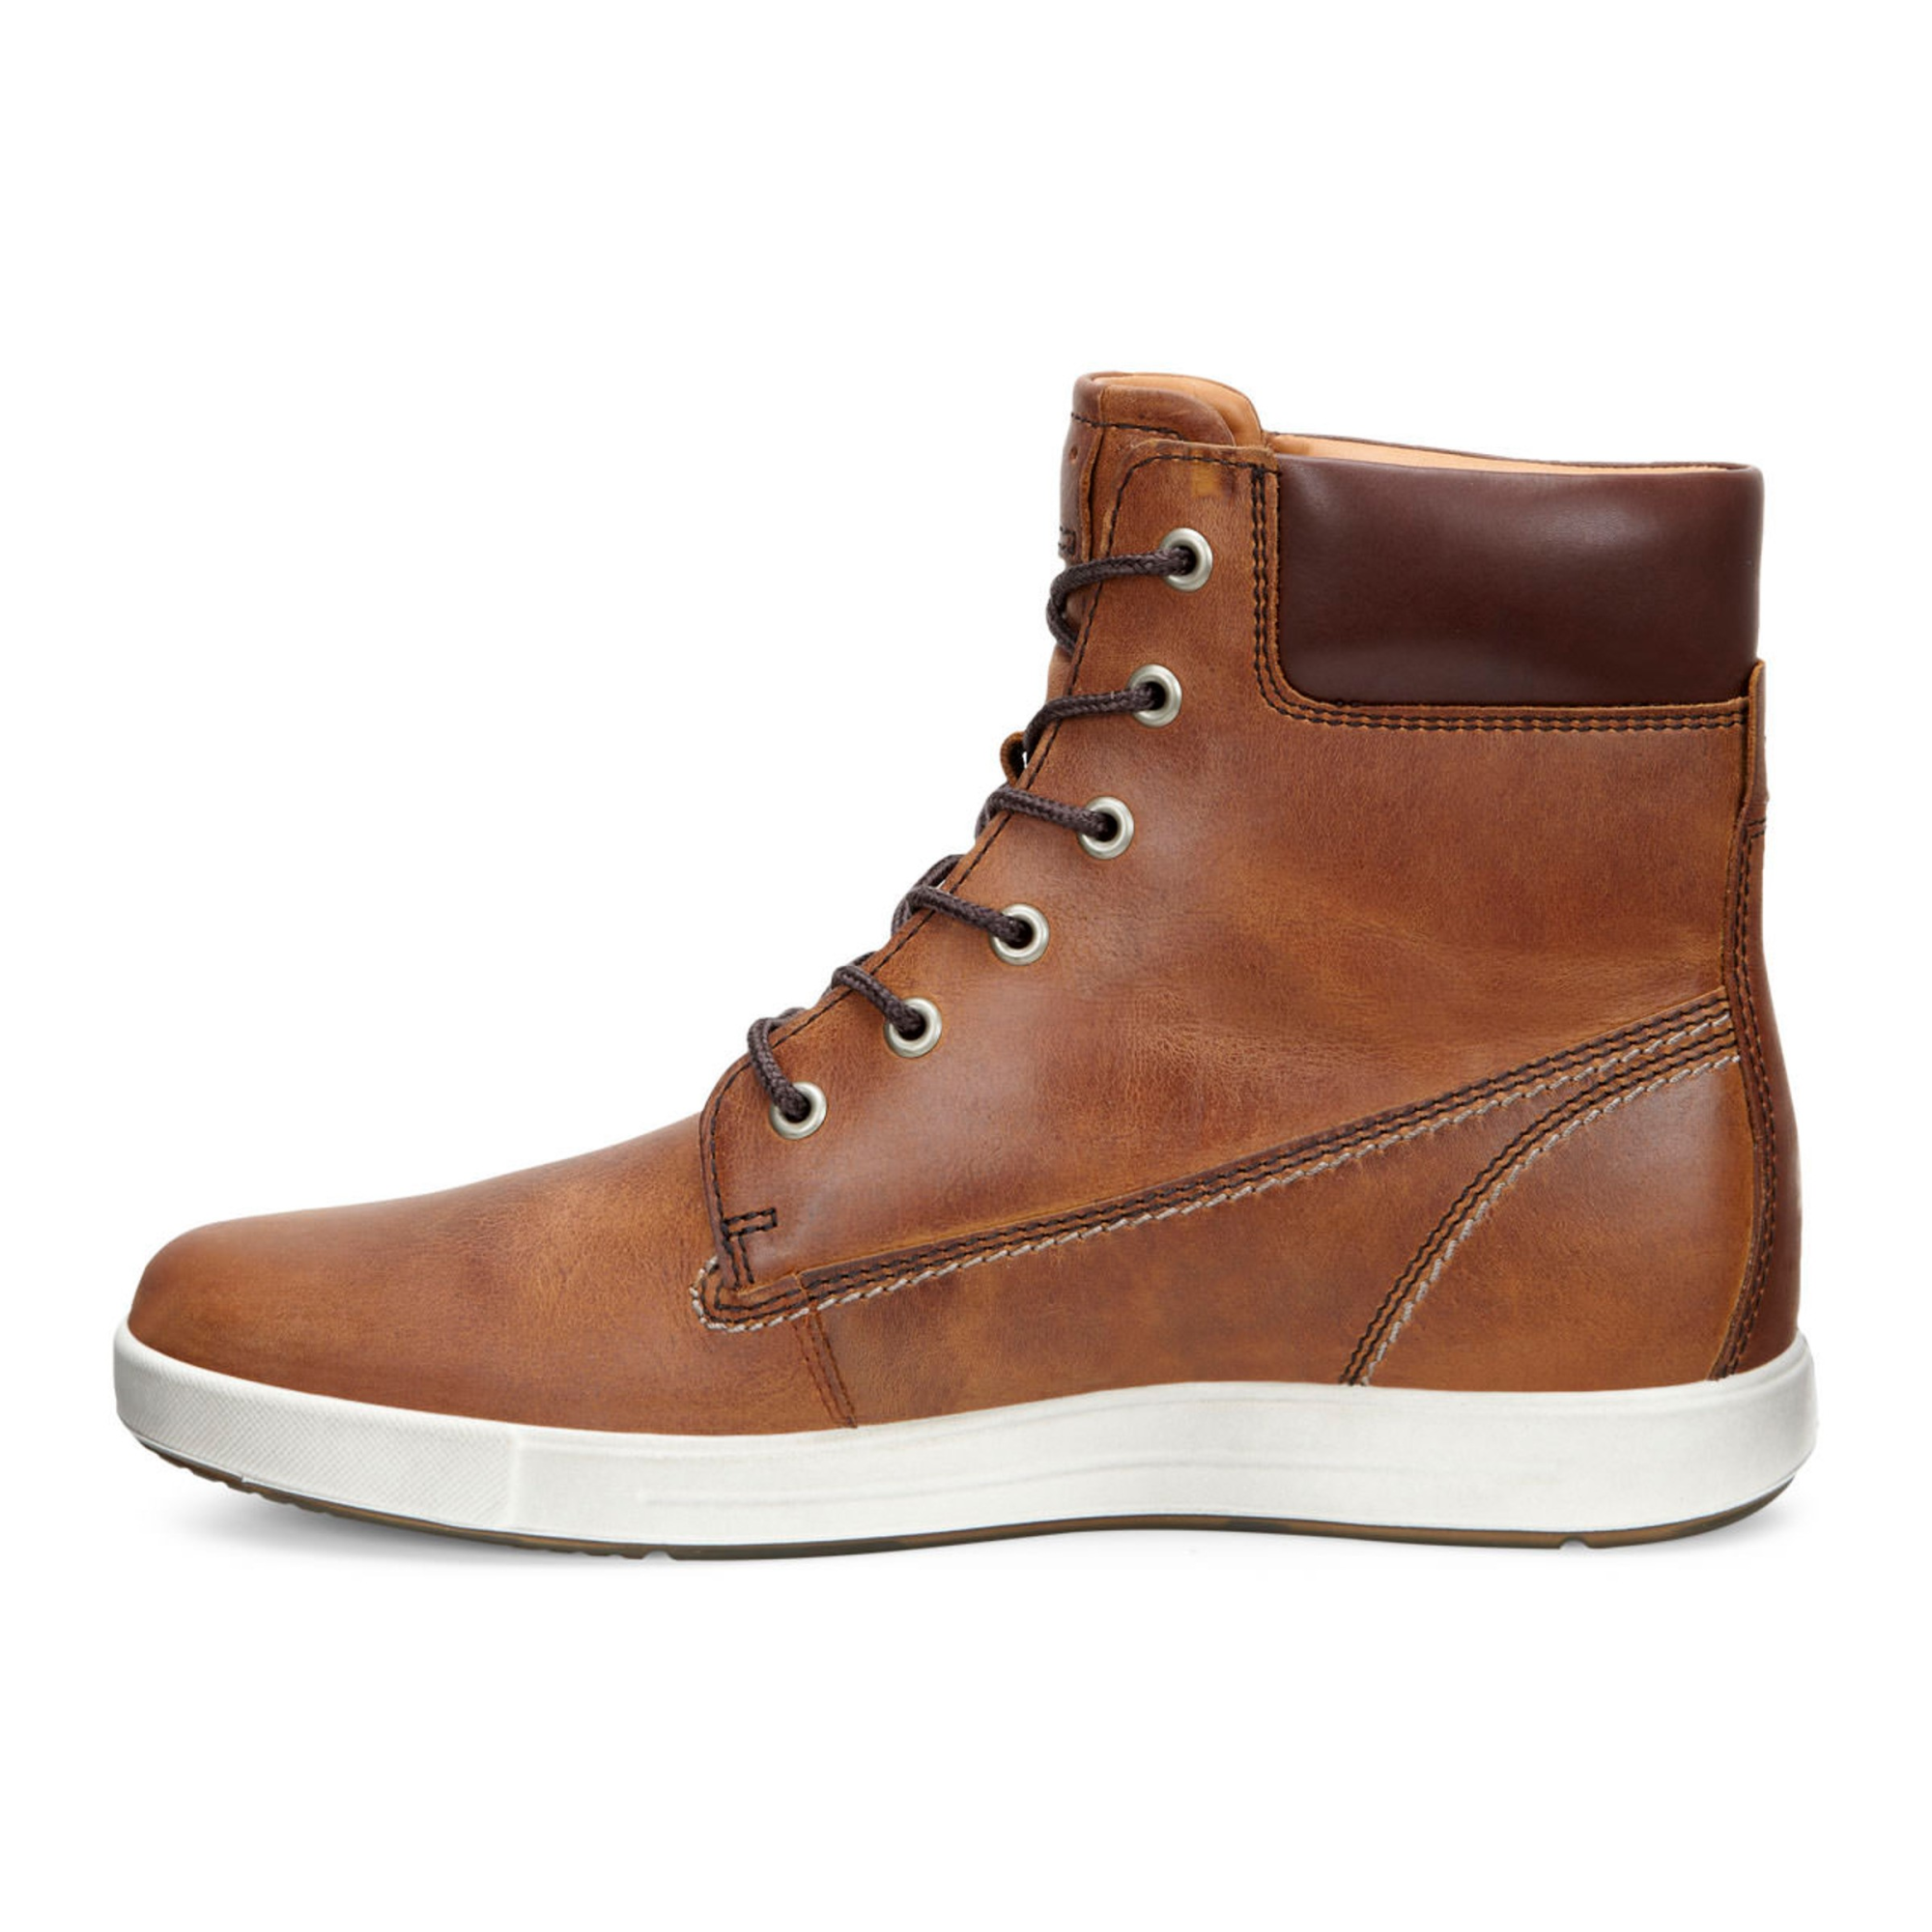 Ecco Eisner Boot 39 - Products Veryk Mall - Veryk Mall, many product, quick response, safe your money!